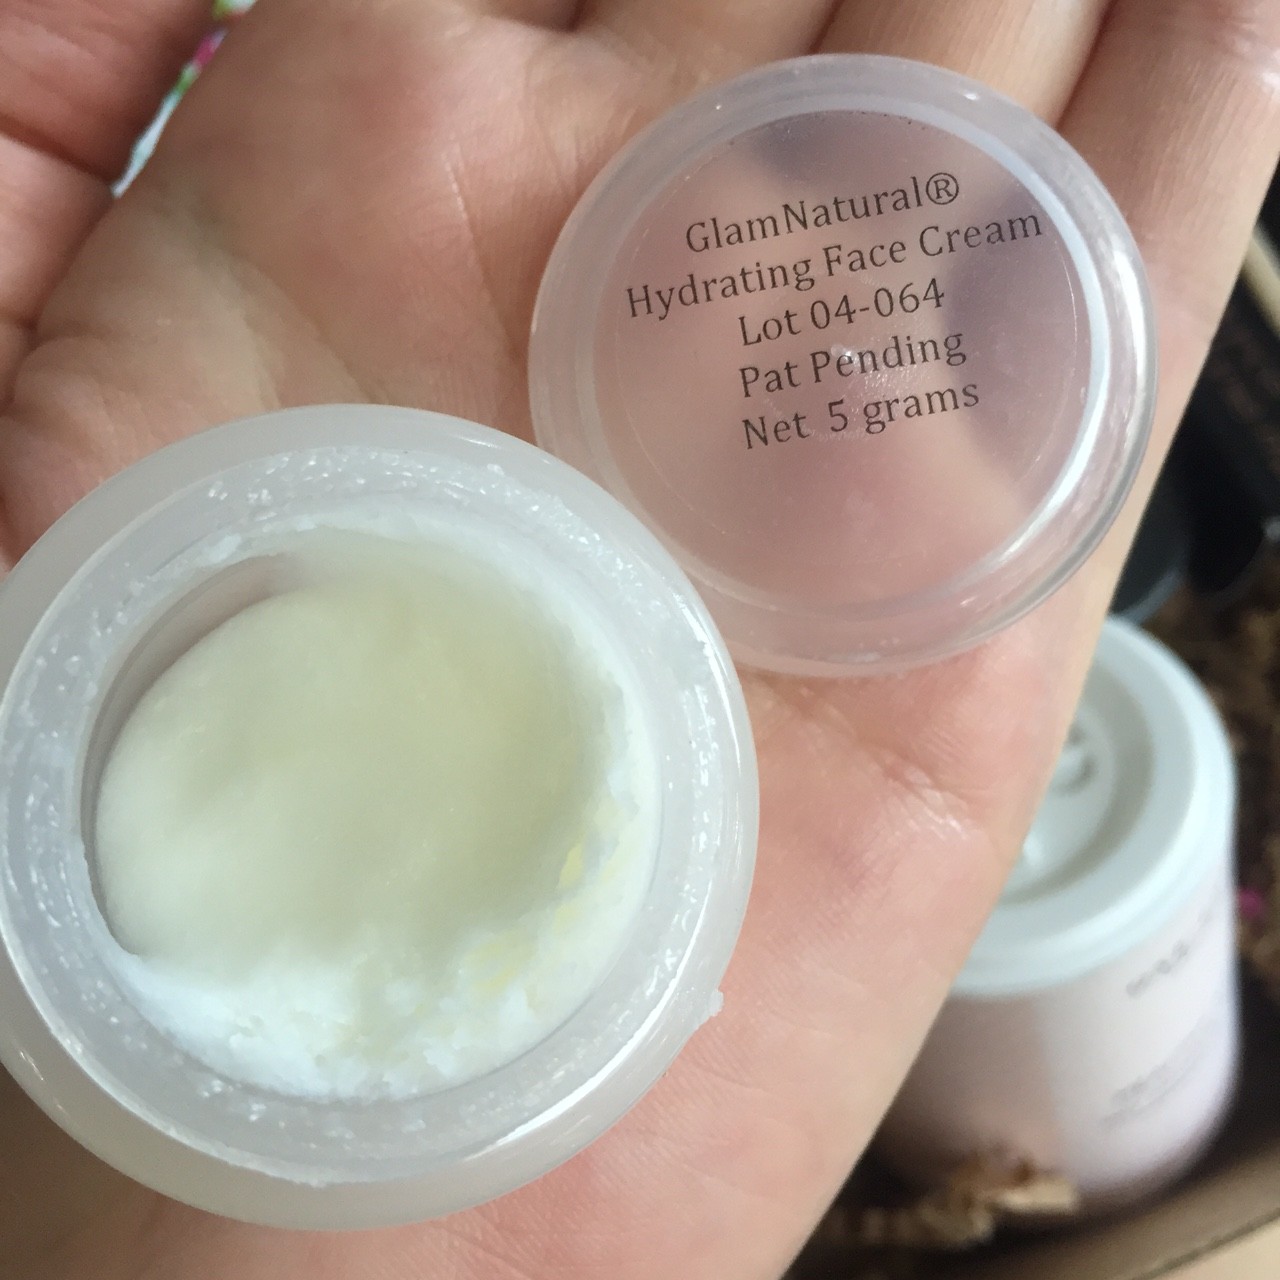 GlamNatural Hydrating Face Cream